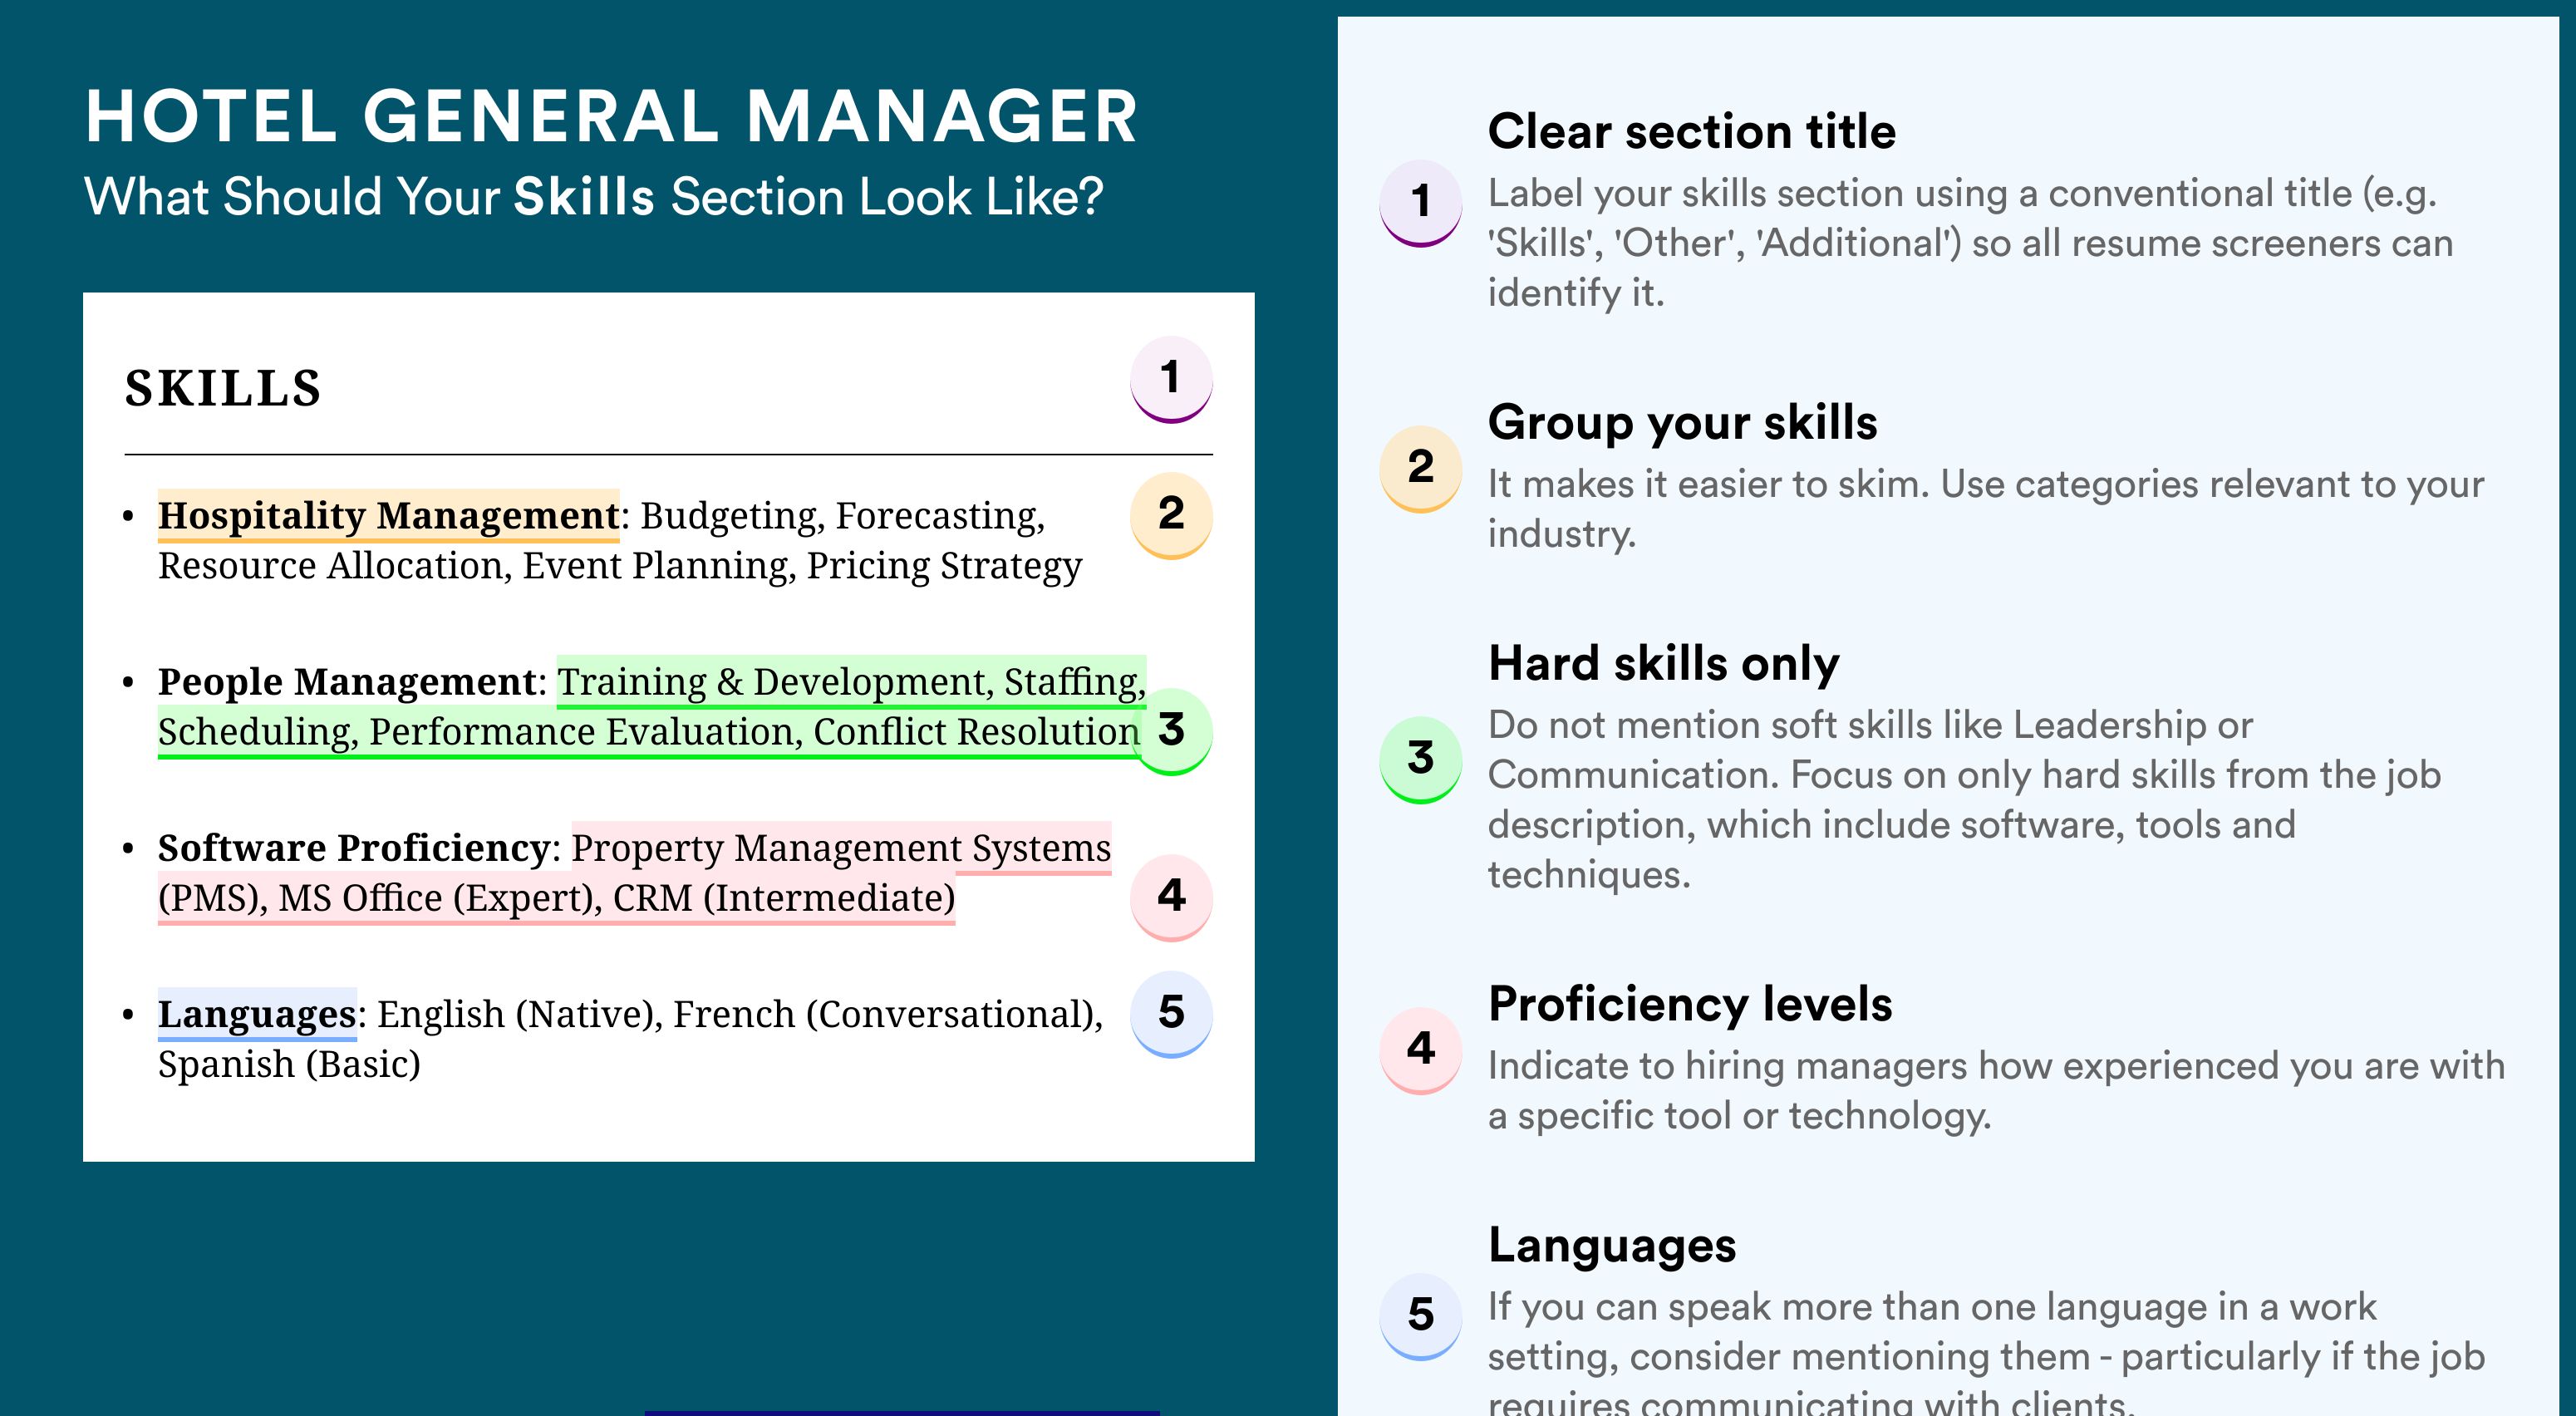 How To Write Your Skills Section - Hotel General Manager Roles